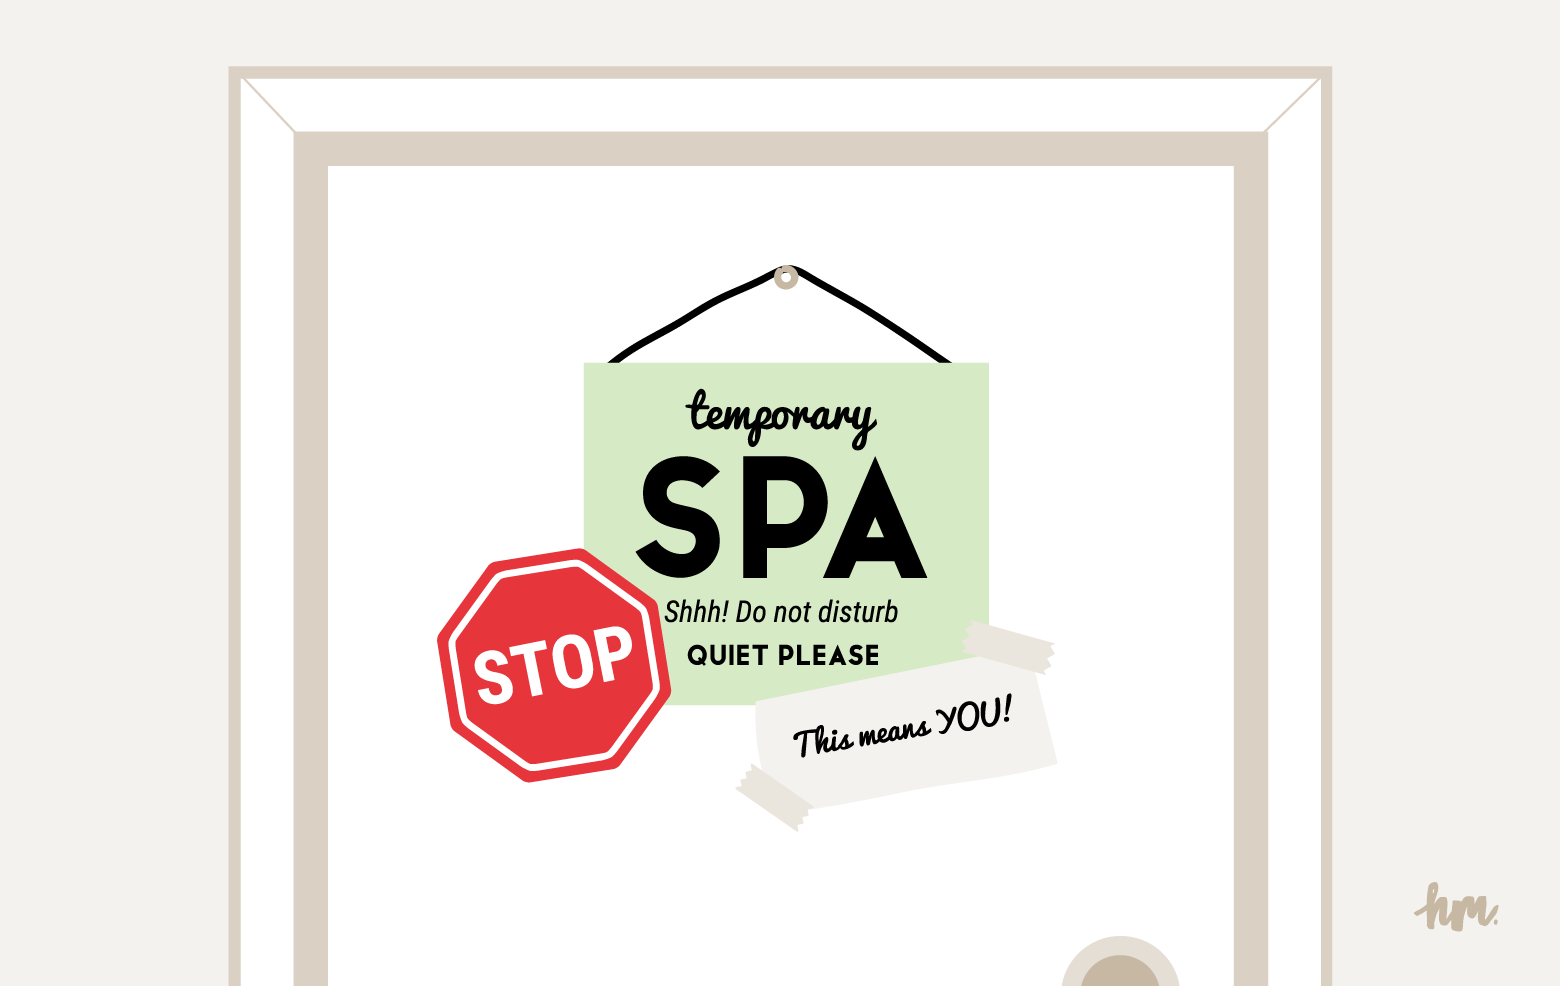 Illustration of a door with a sign that says, "temporary spa. Shhhh! Do not disturb. Quiet Please." Also has a stop sign and another sign that states, "This means you!"